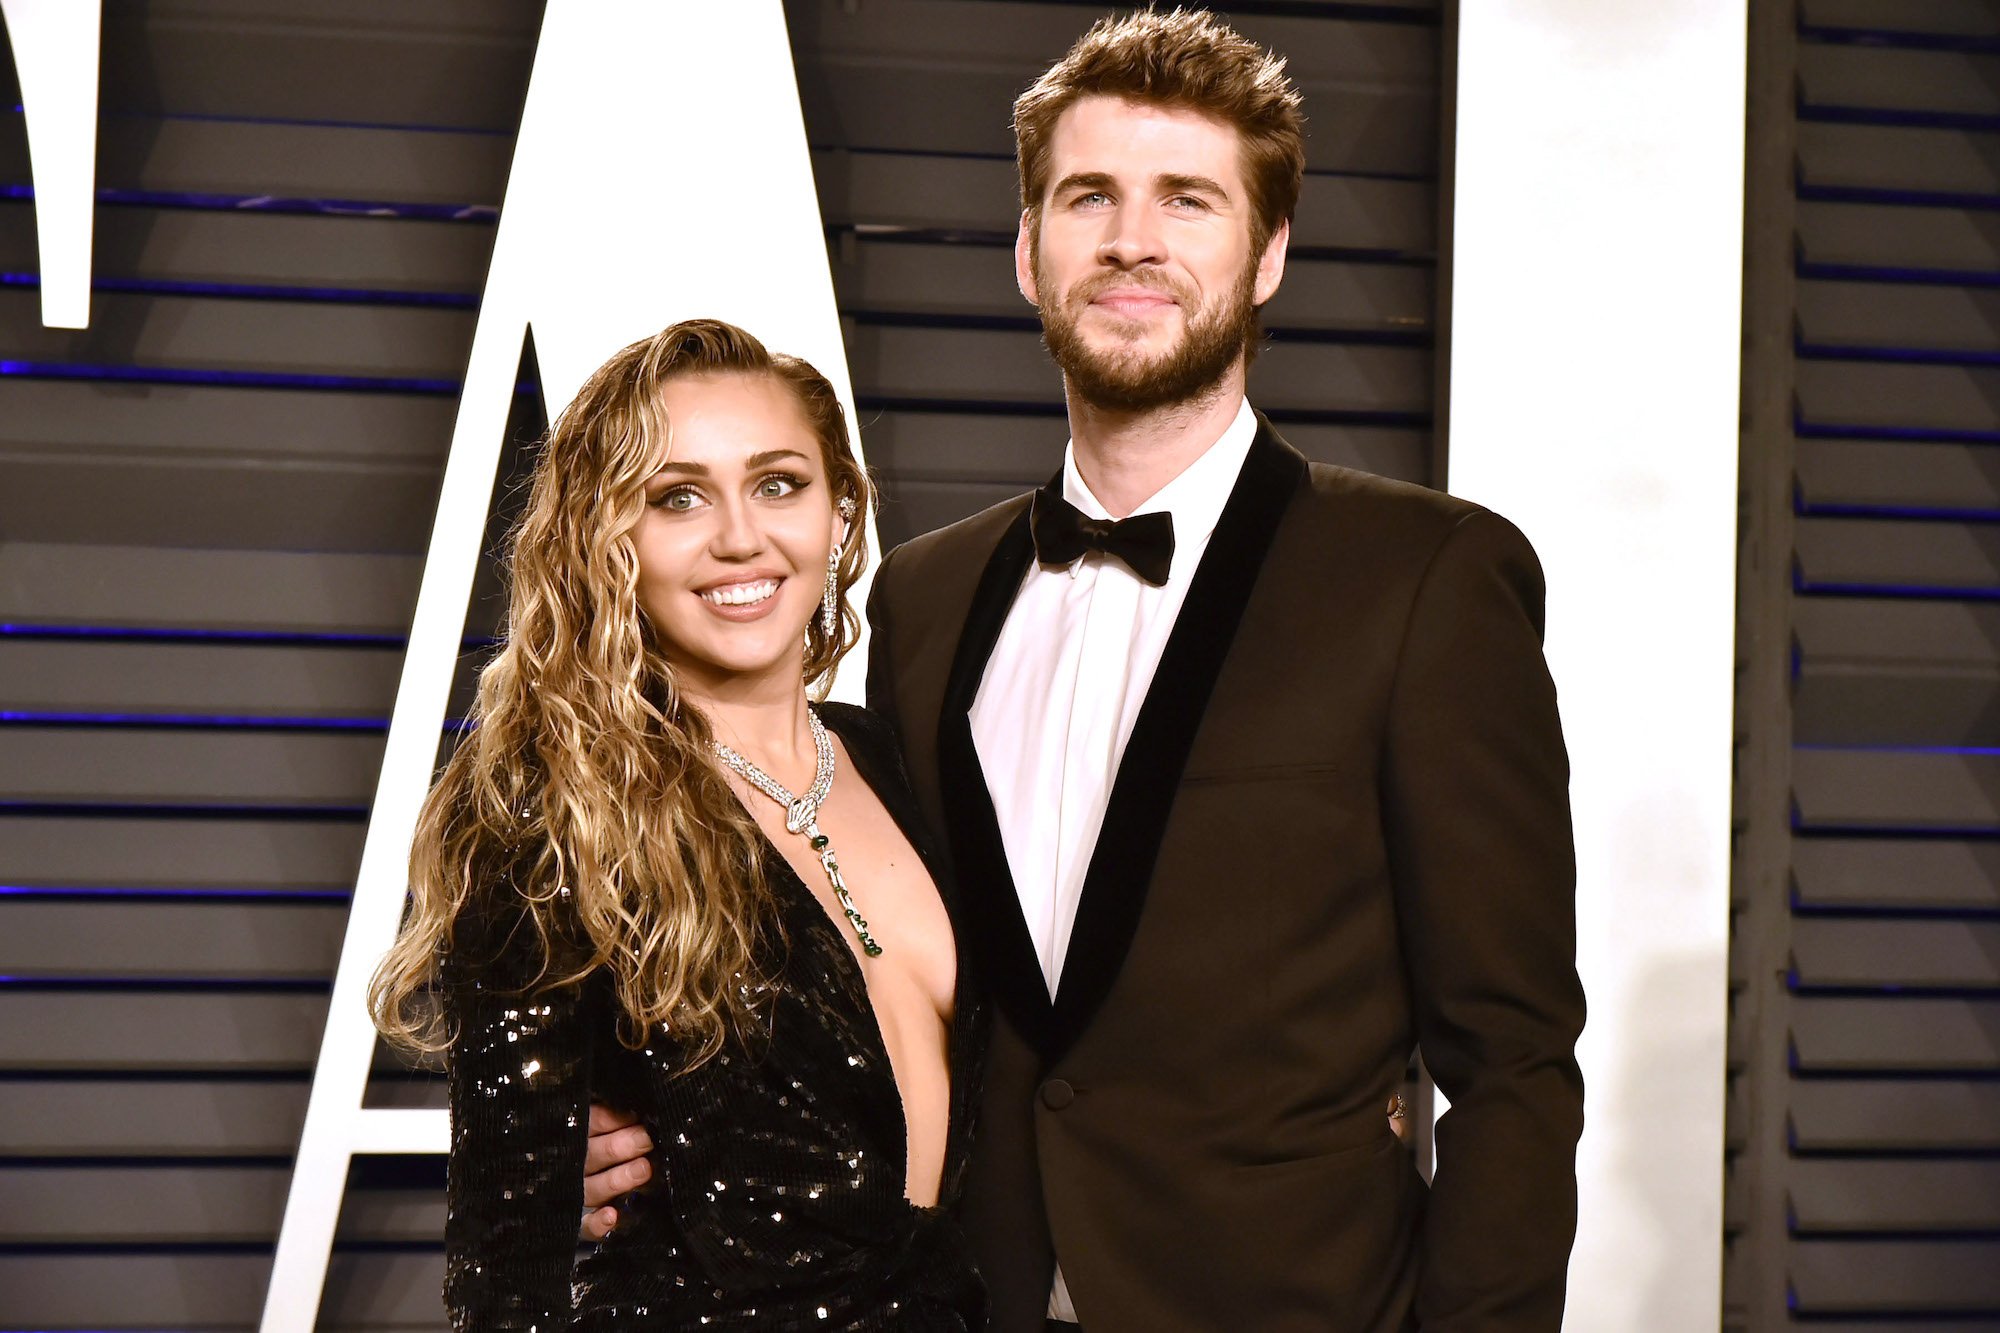 Miley Cyrus’ Song ‘Malibu’ Is A Much Bigger Part of Her and Liam Hemsworth’s Love Story Than You Realize